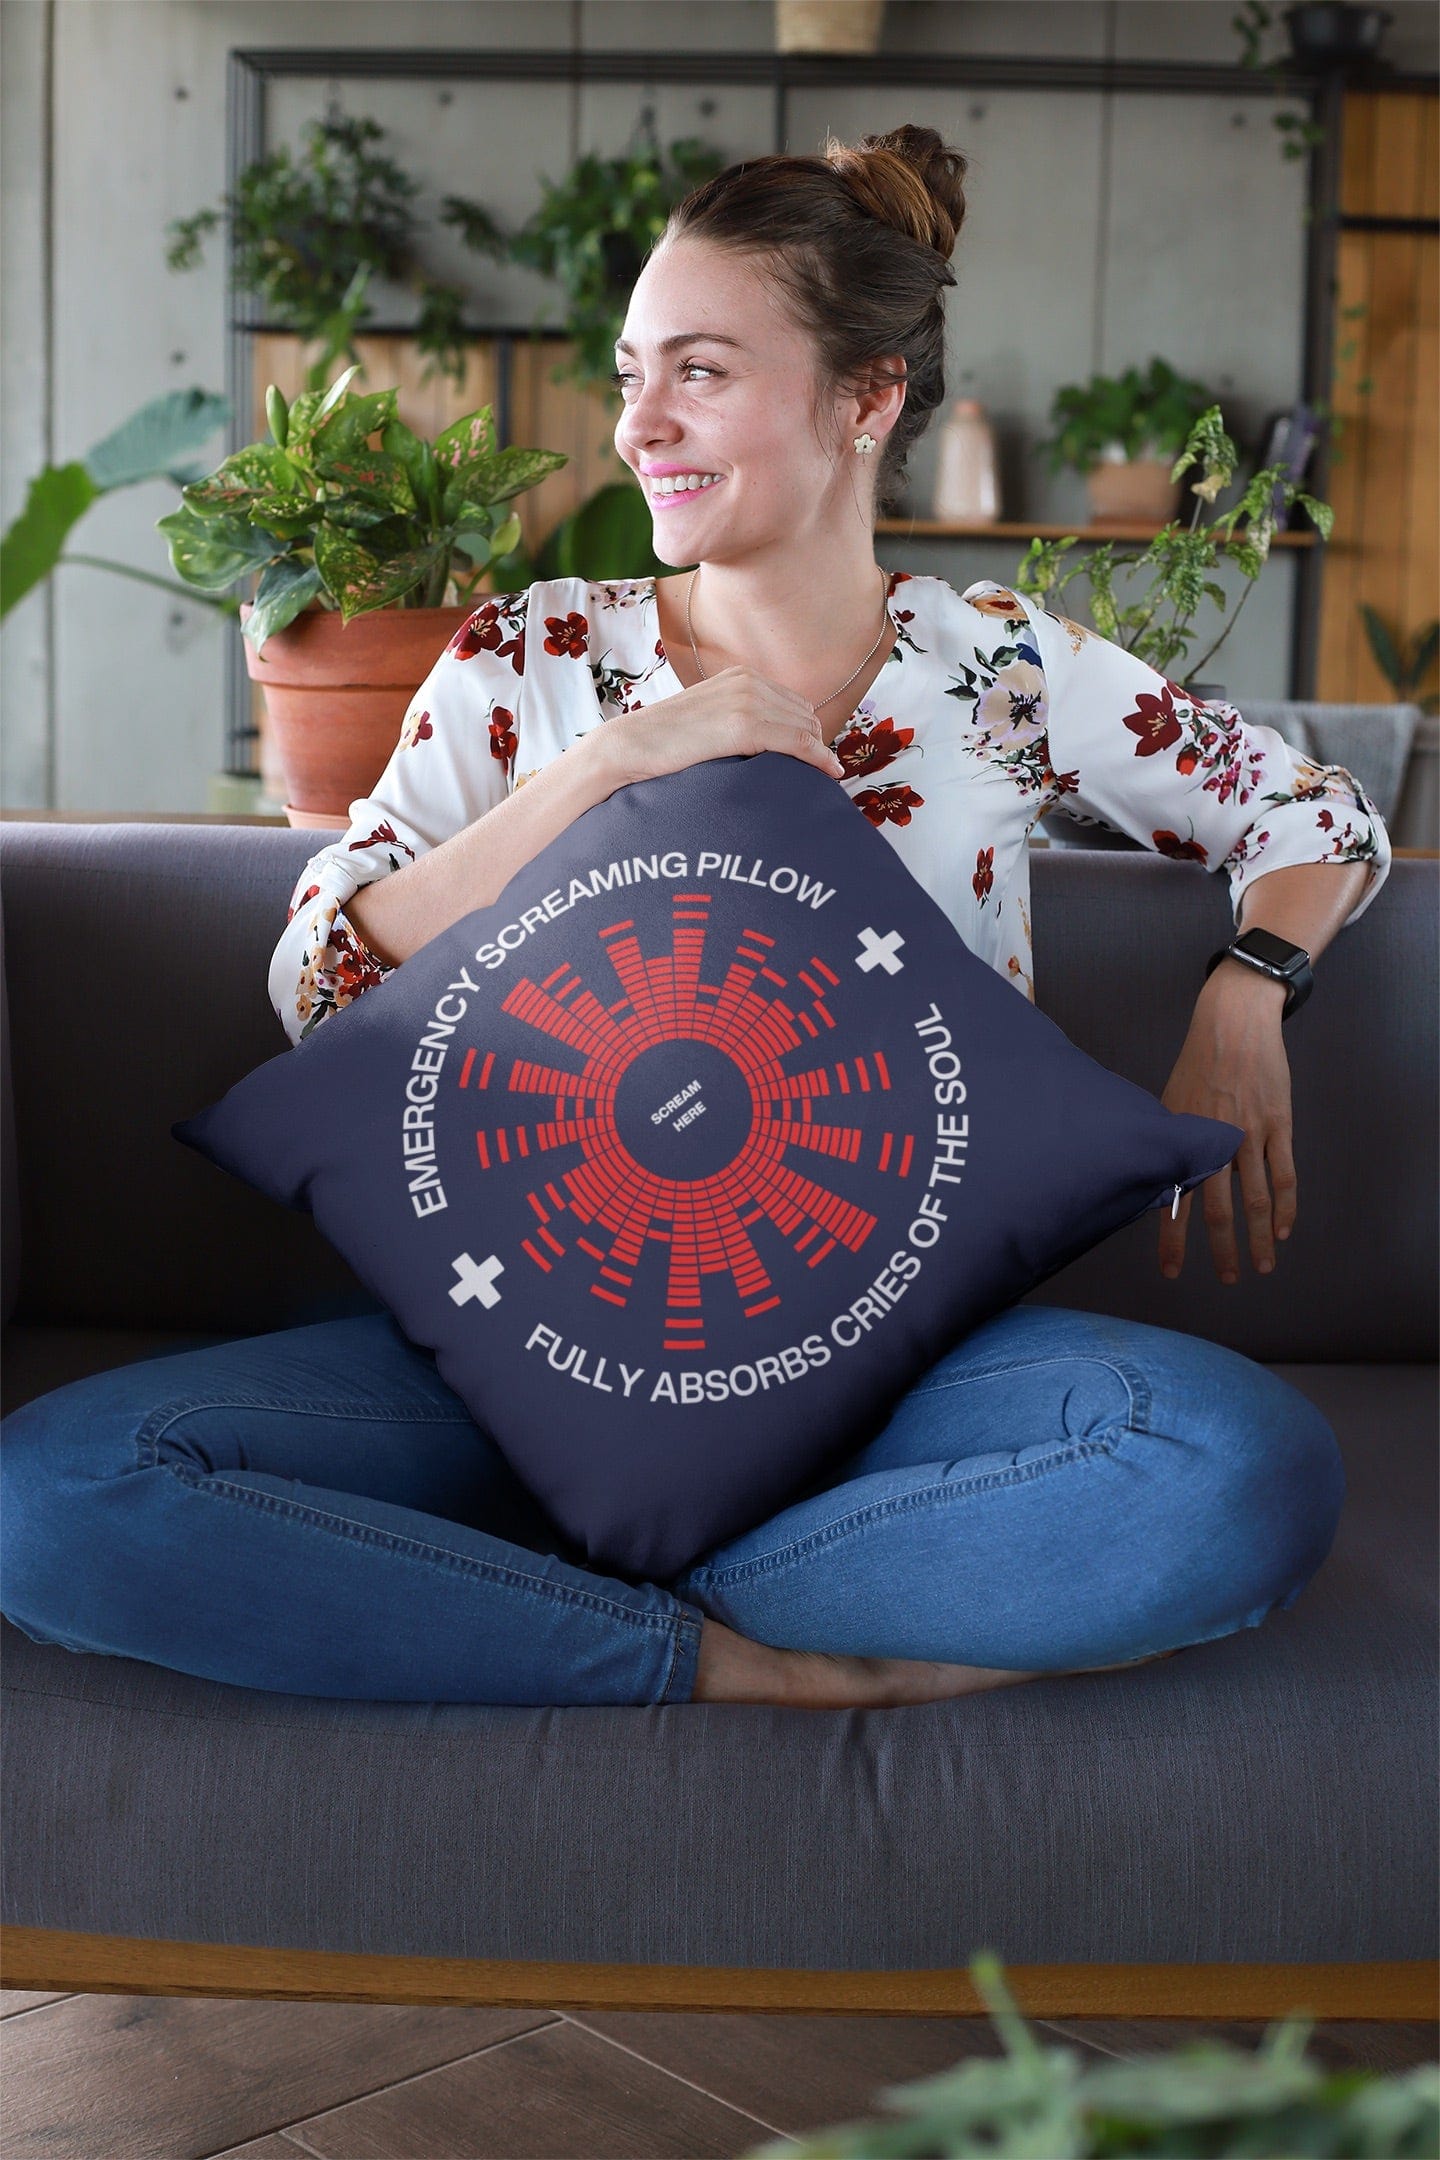 cheeky gifts and styles for brits and anglophiles including this Emergency Screaming Pillow